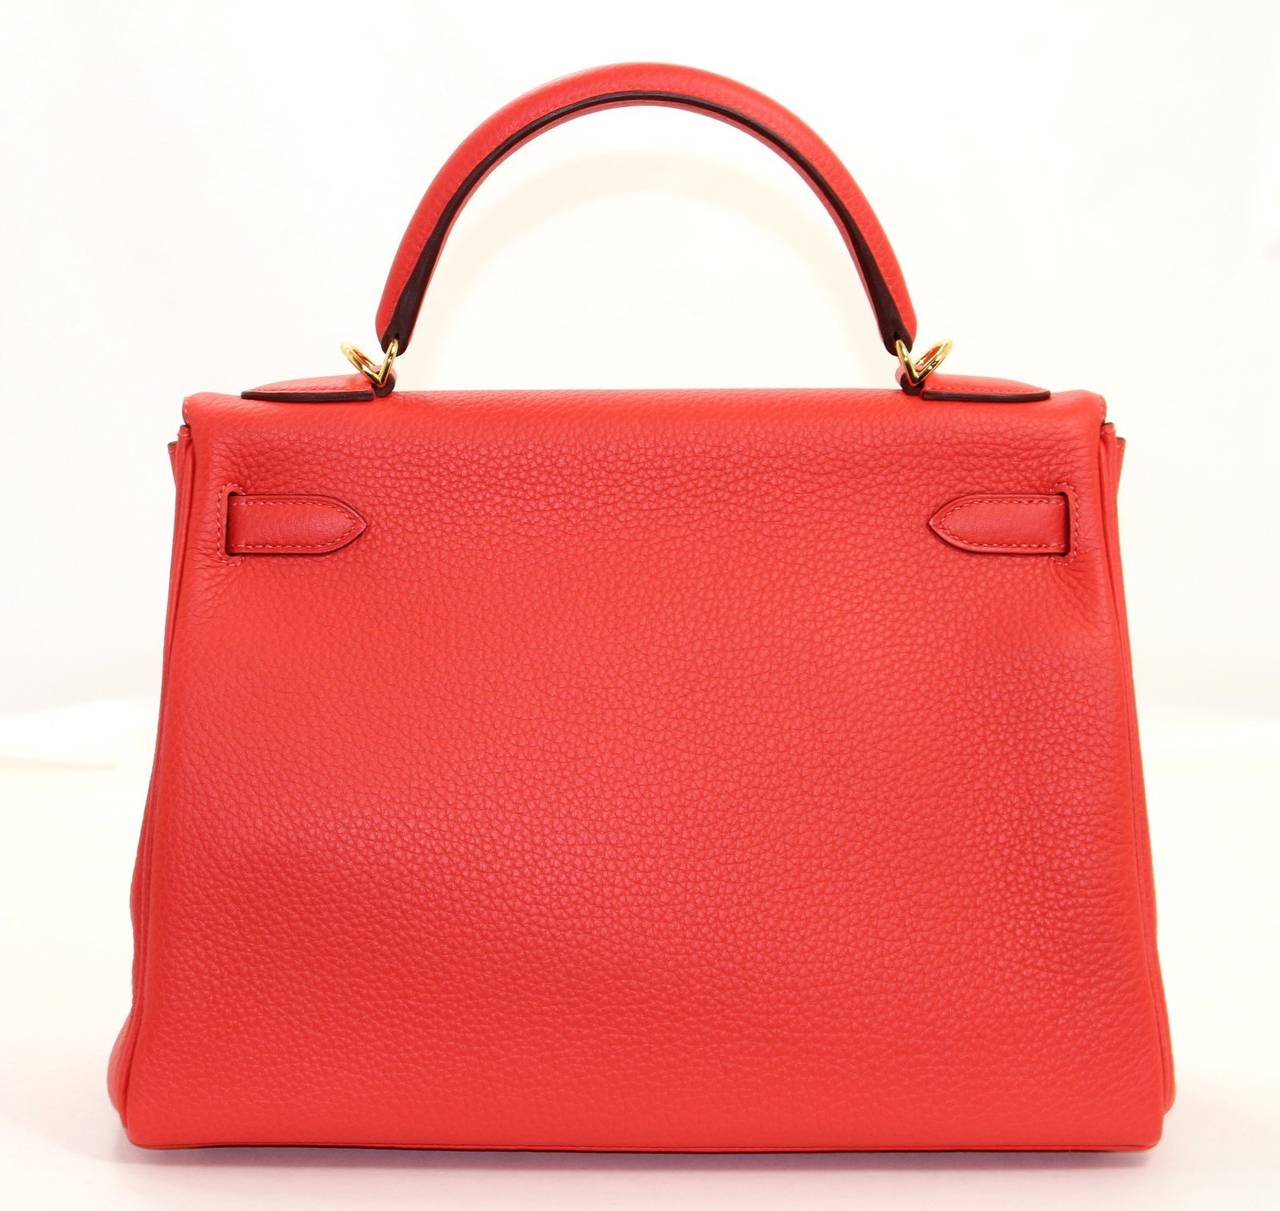 Pristine, store fresh condition (plastic on hardware) Hermès Kelly Bag in Rouge Pivoine Clemence, 32 cm size.   Crafted by hand and considered by many as the epitome of luxury items, Kellys are extremely difficult to get. Scratch resistant and